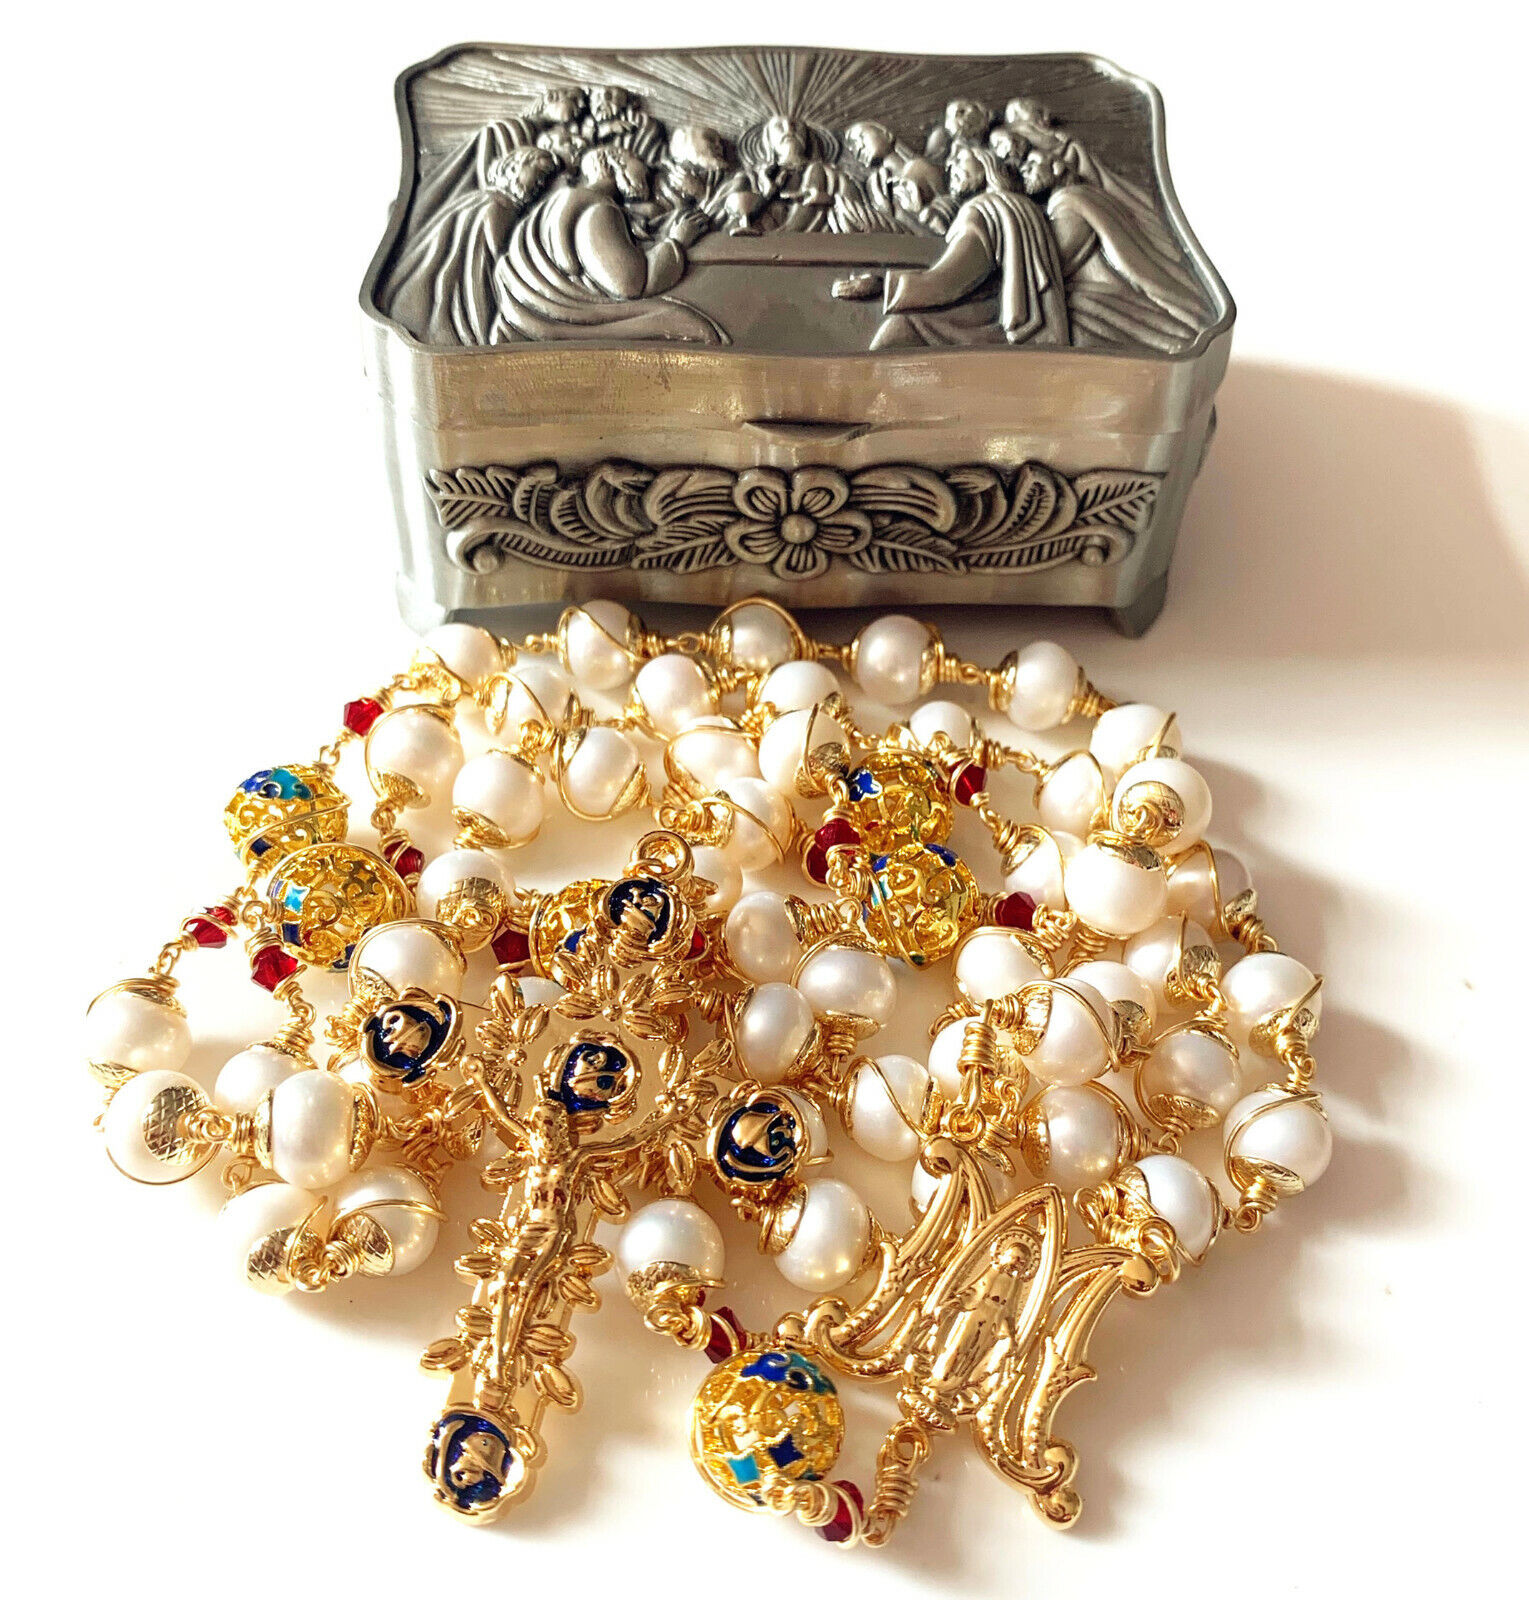 Gold Wire Wrap Bead AAA+ White Real Pearl Catholic Rosary Necklace Cross Box